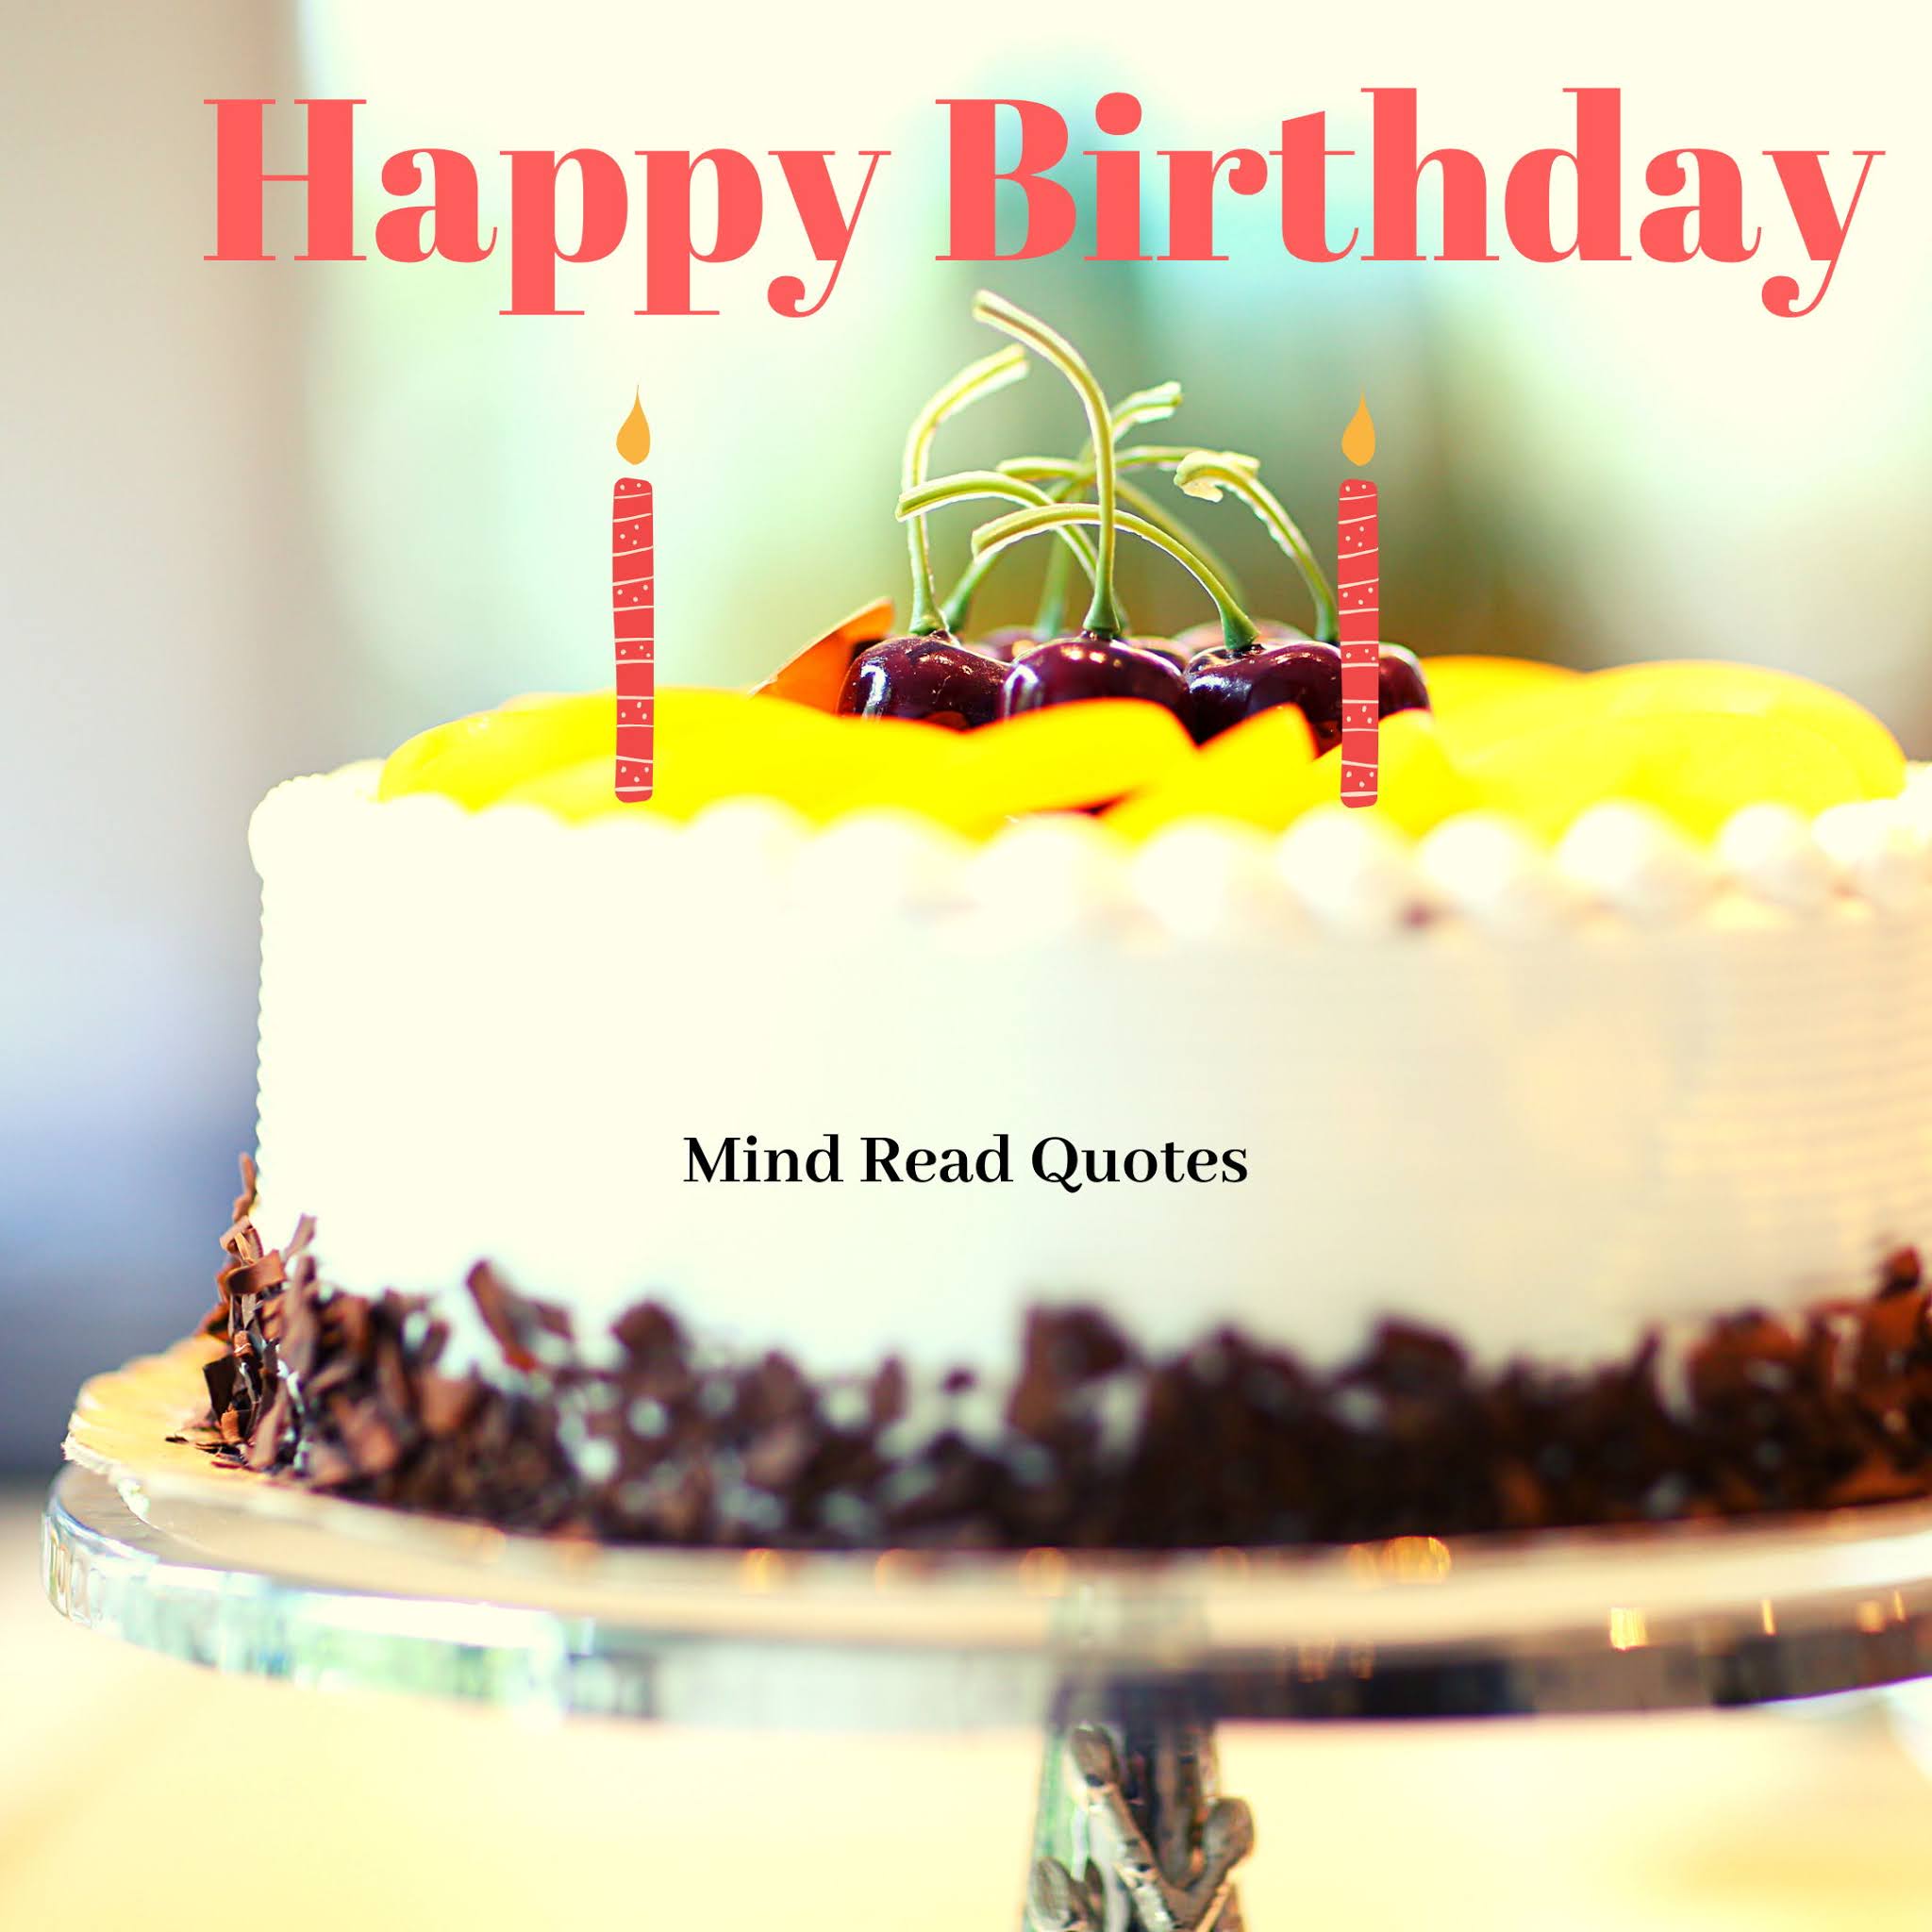 Happy Birthday wishes and quotes with images